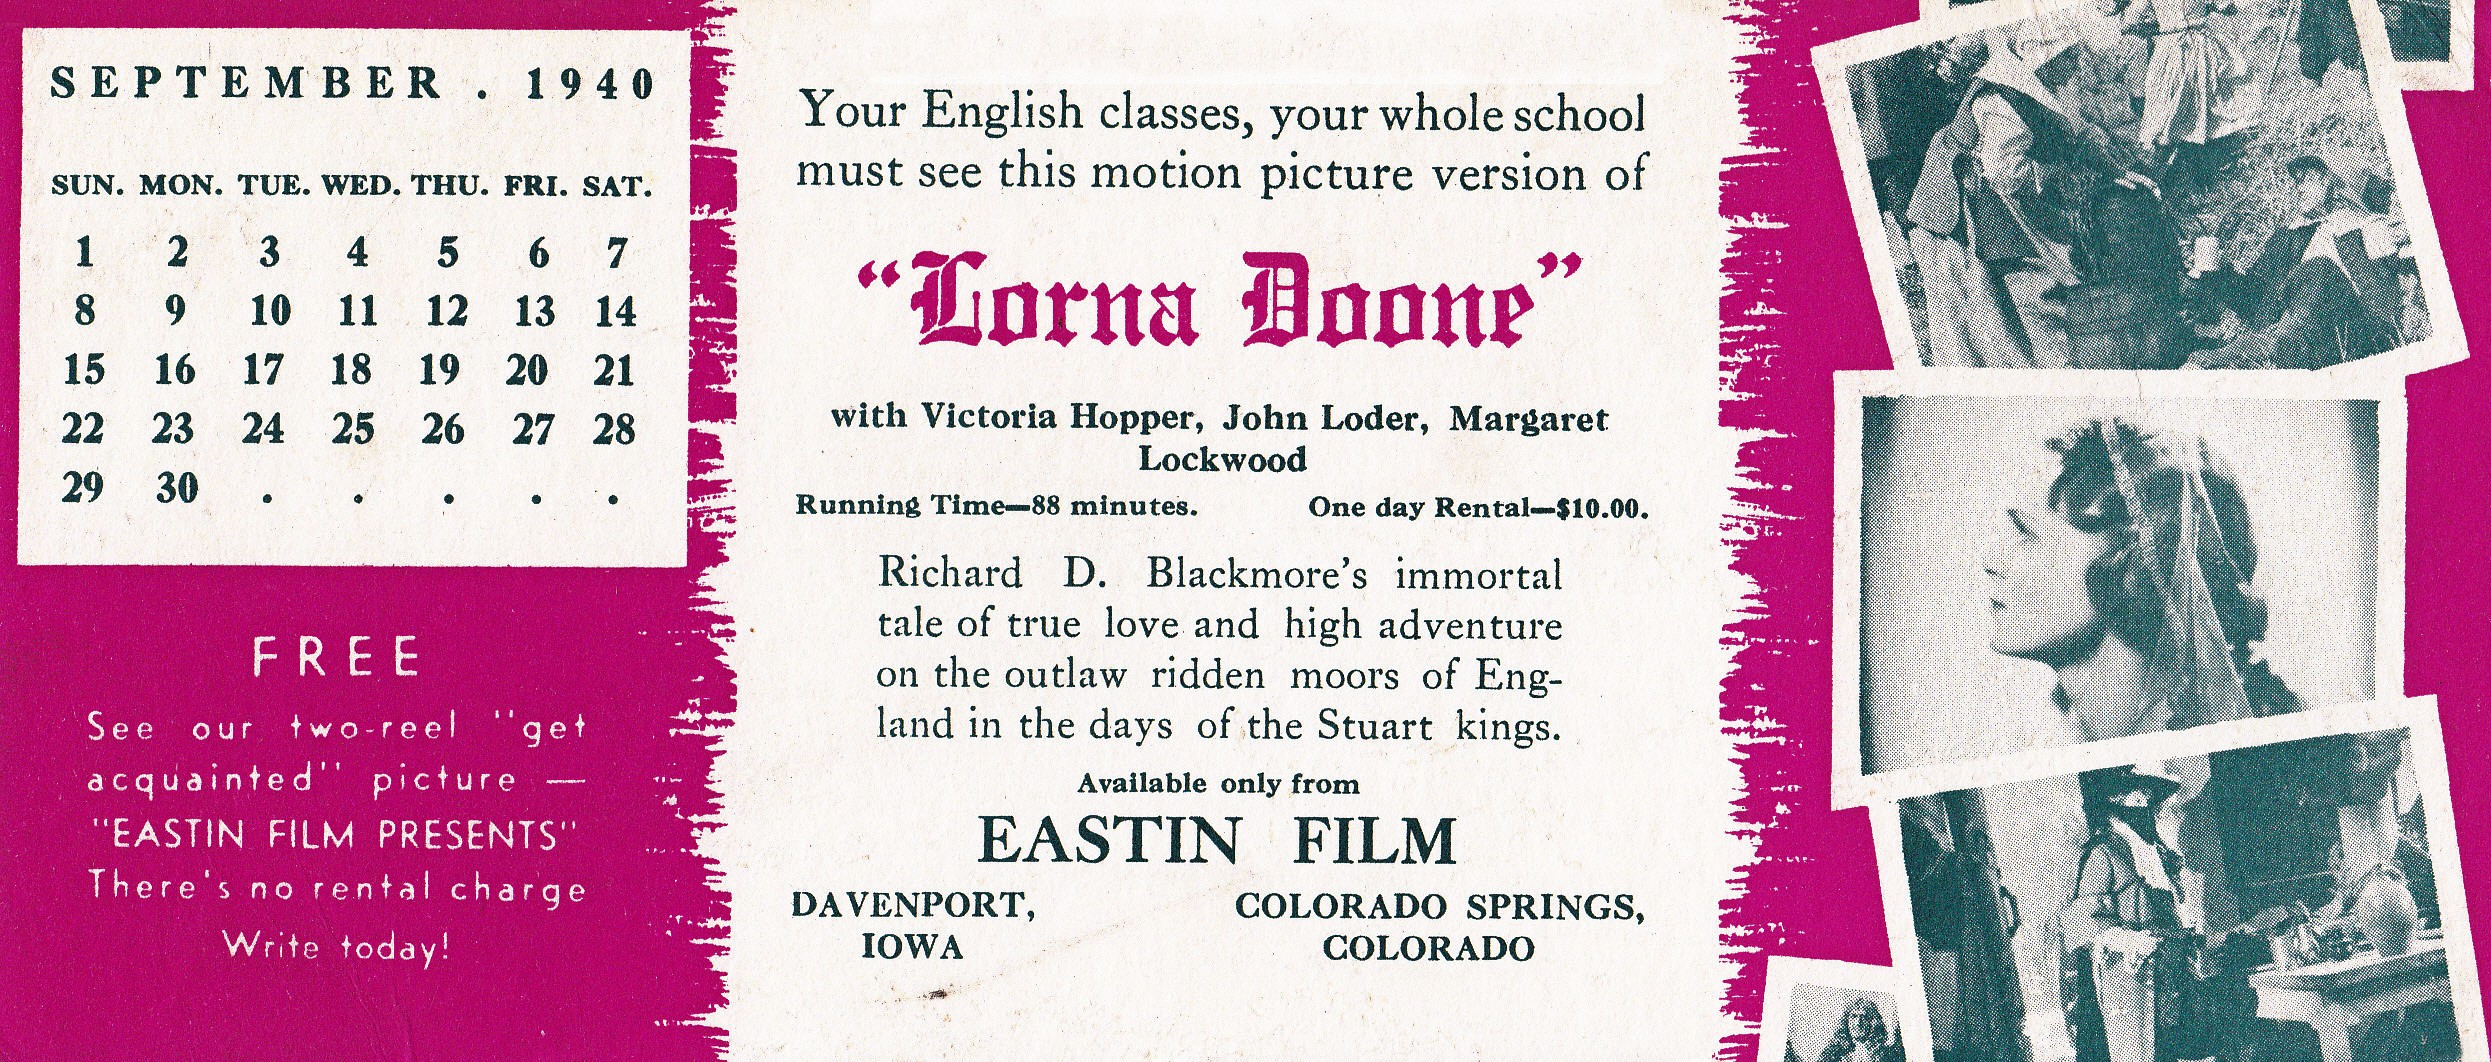 Your English classes, your whole school must see this motion picture version of Lorna Doone with Victoria Hopper, John Loder, and Margaret Lockwood.  Ink blotter from September 1940